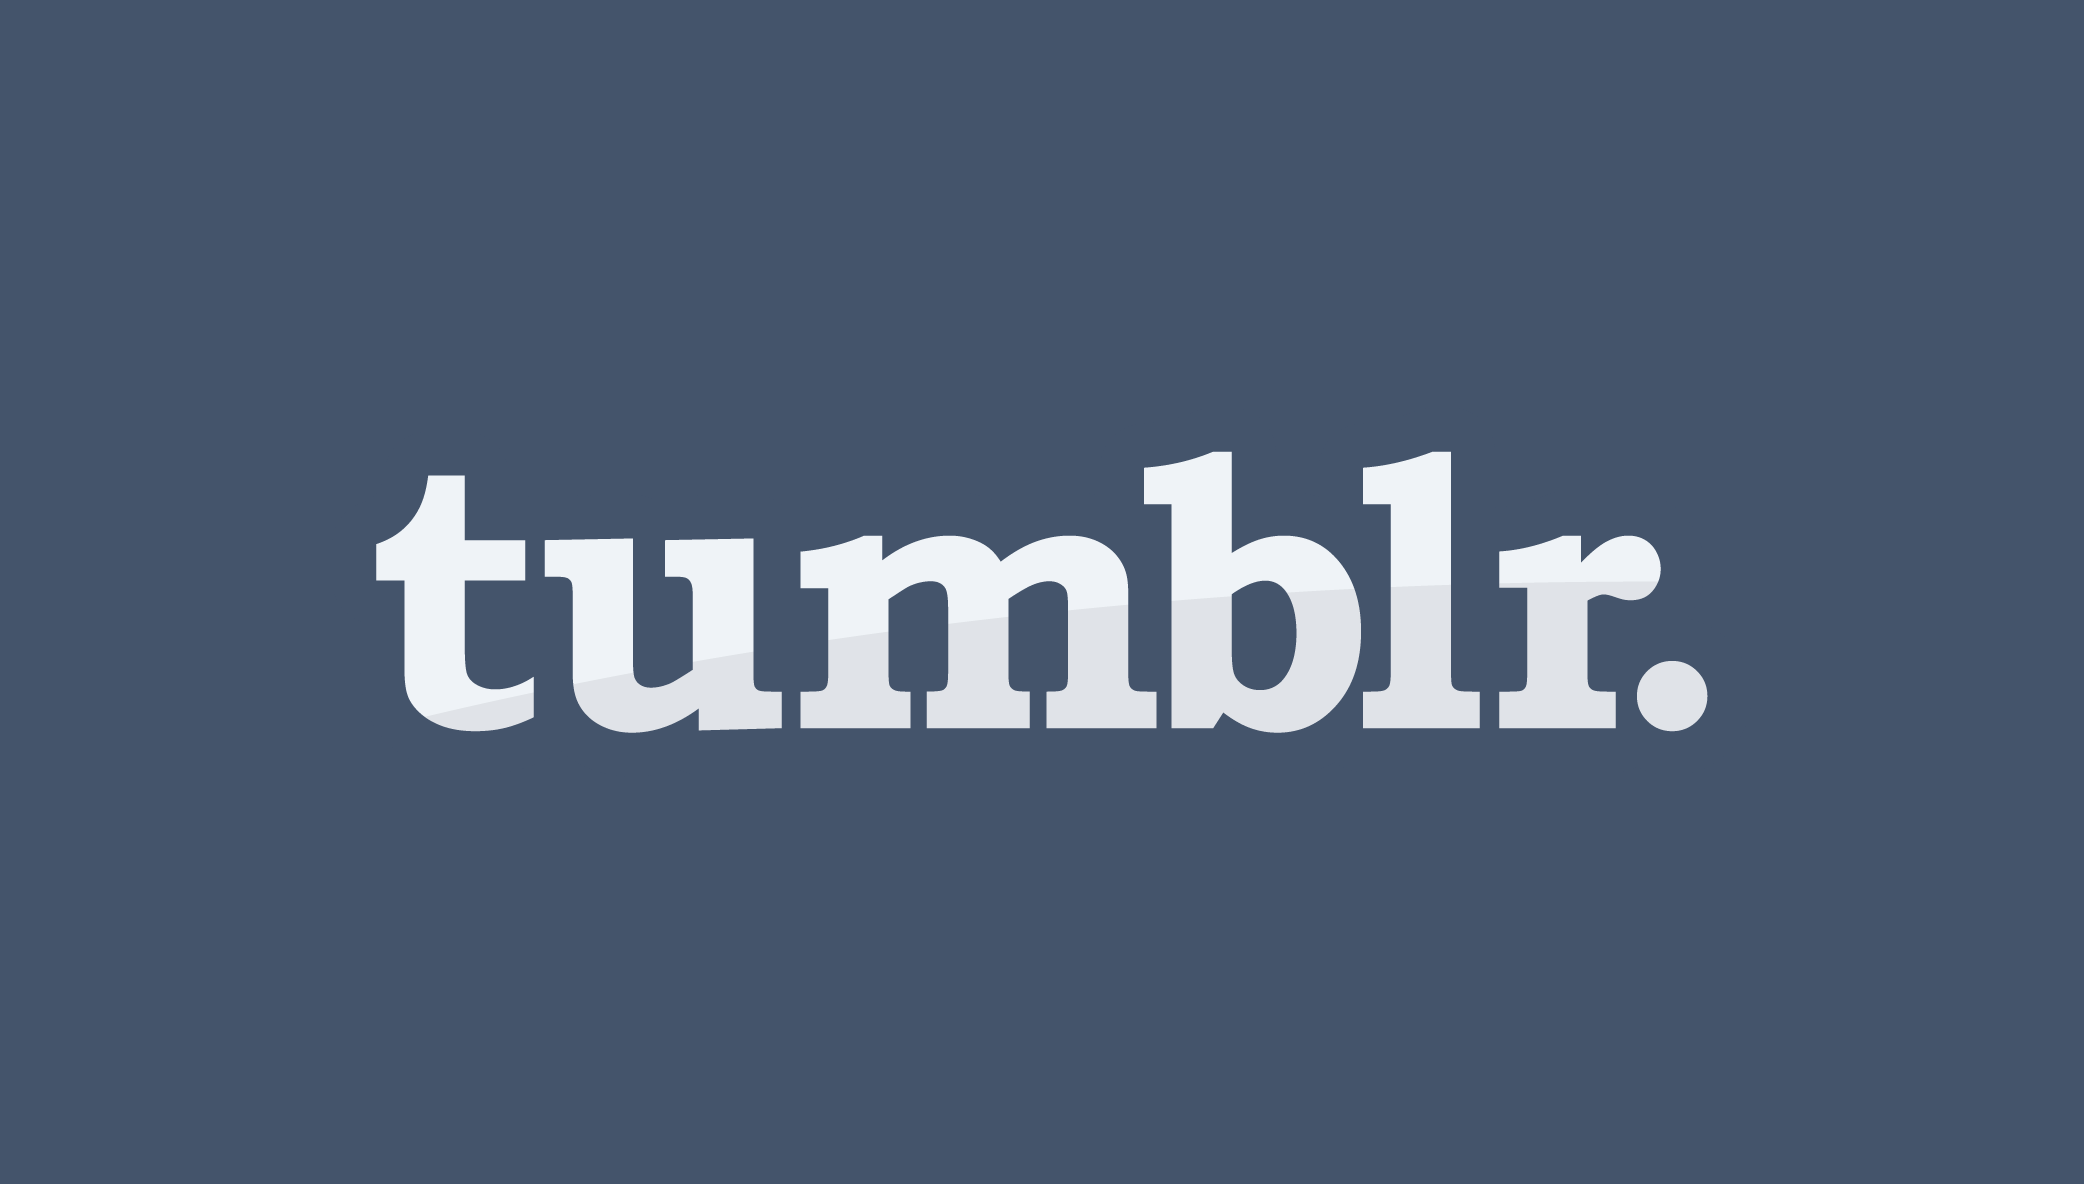 Tumblr: Microblogging Its Way Up